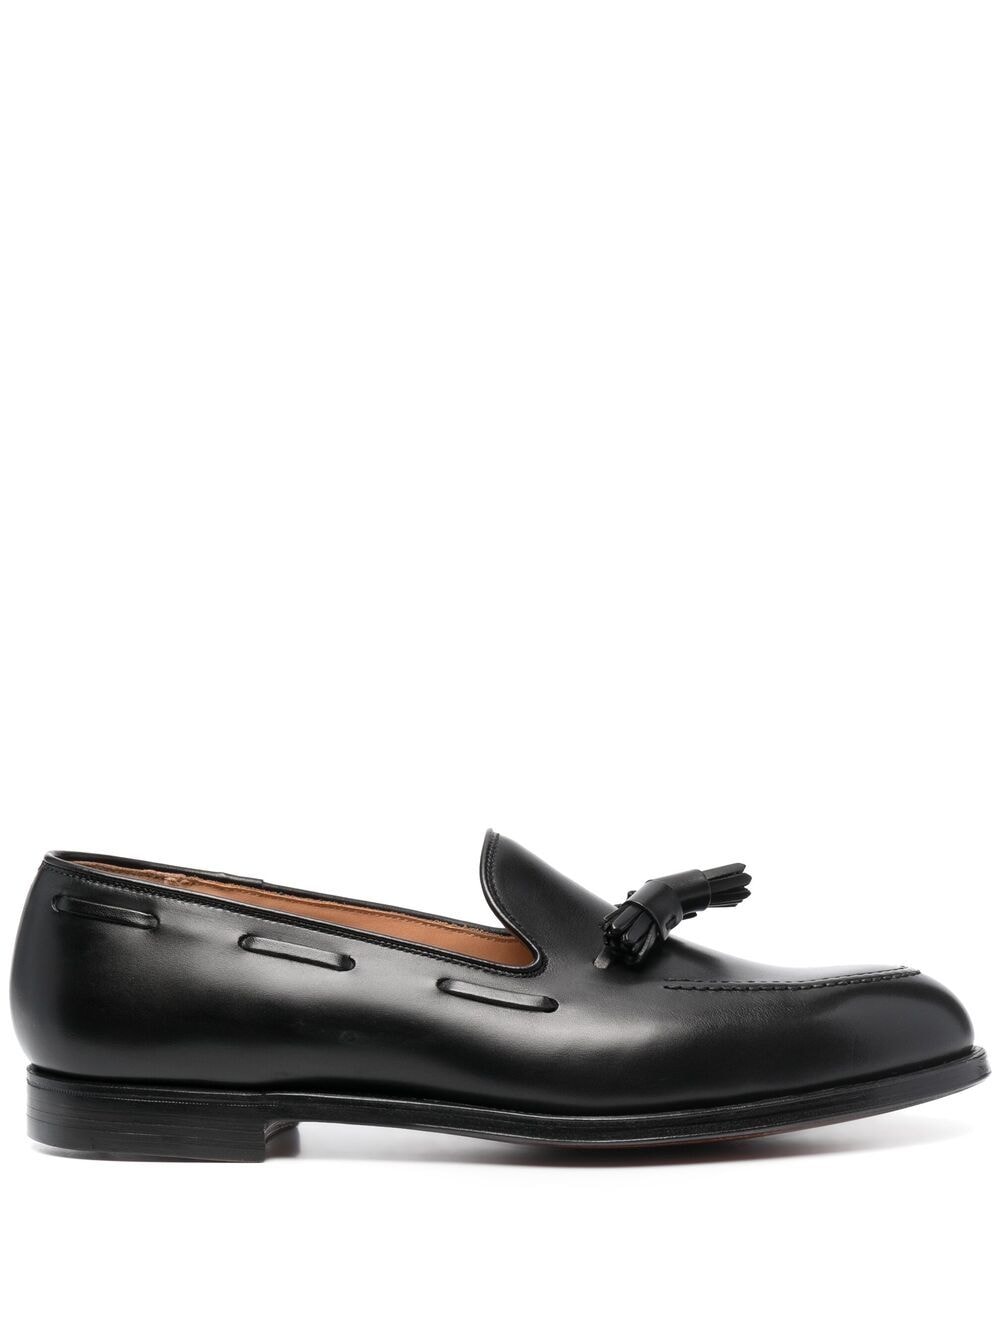 Cavendish leather loafers